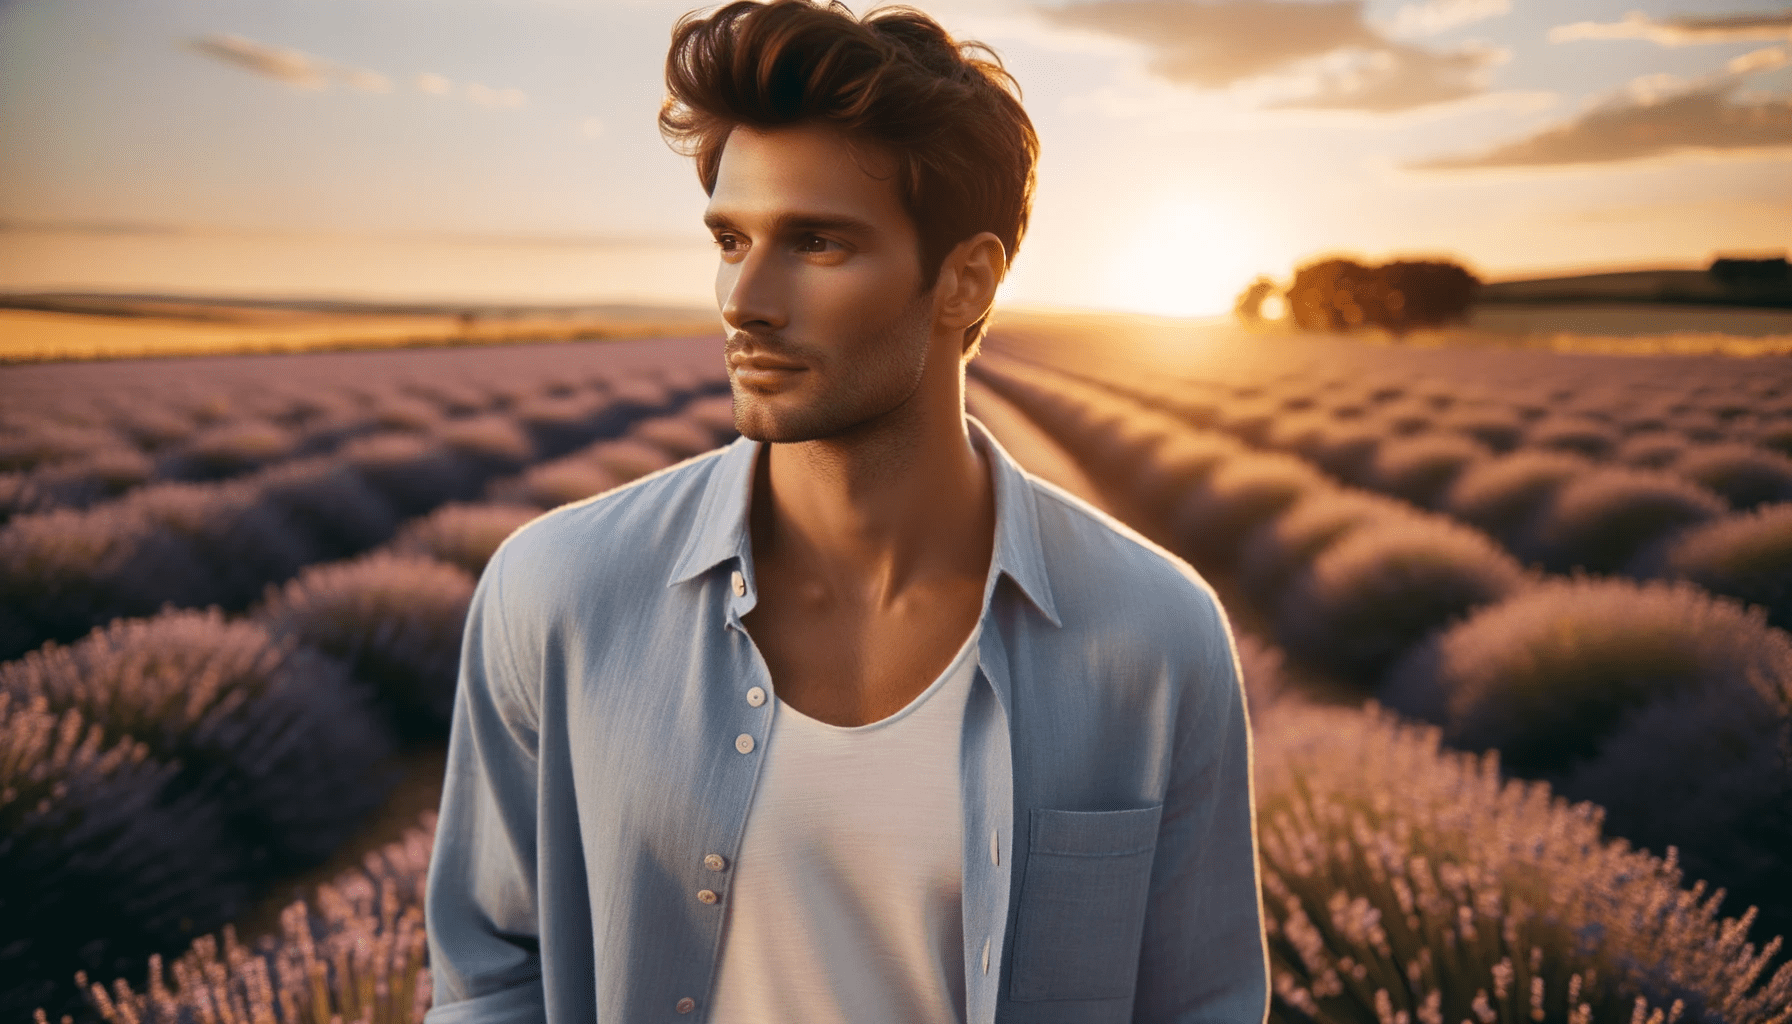 Photo of a man with medium complexion leisurely walking through a lavender field during sunset. The purple hues of the flowers and the golden sky crea